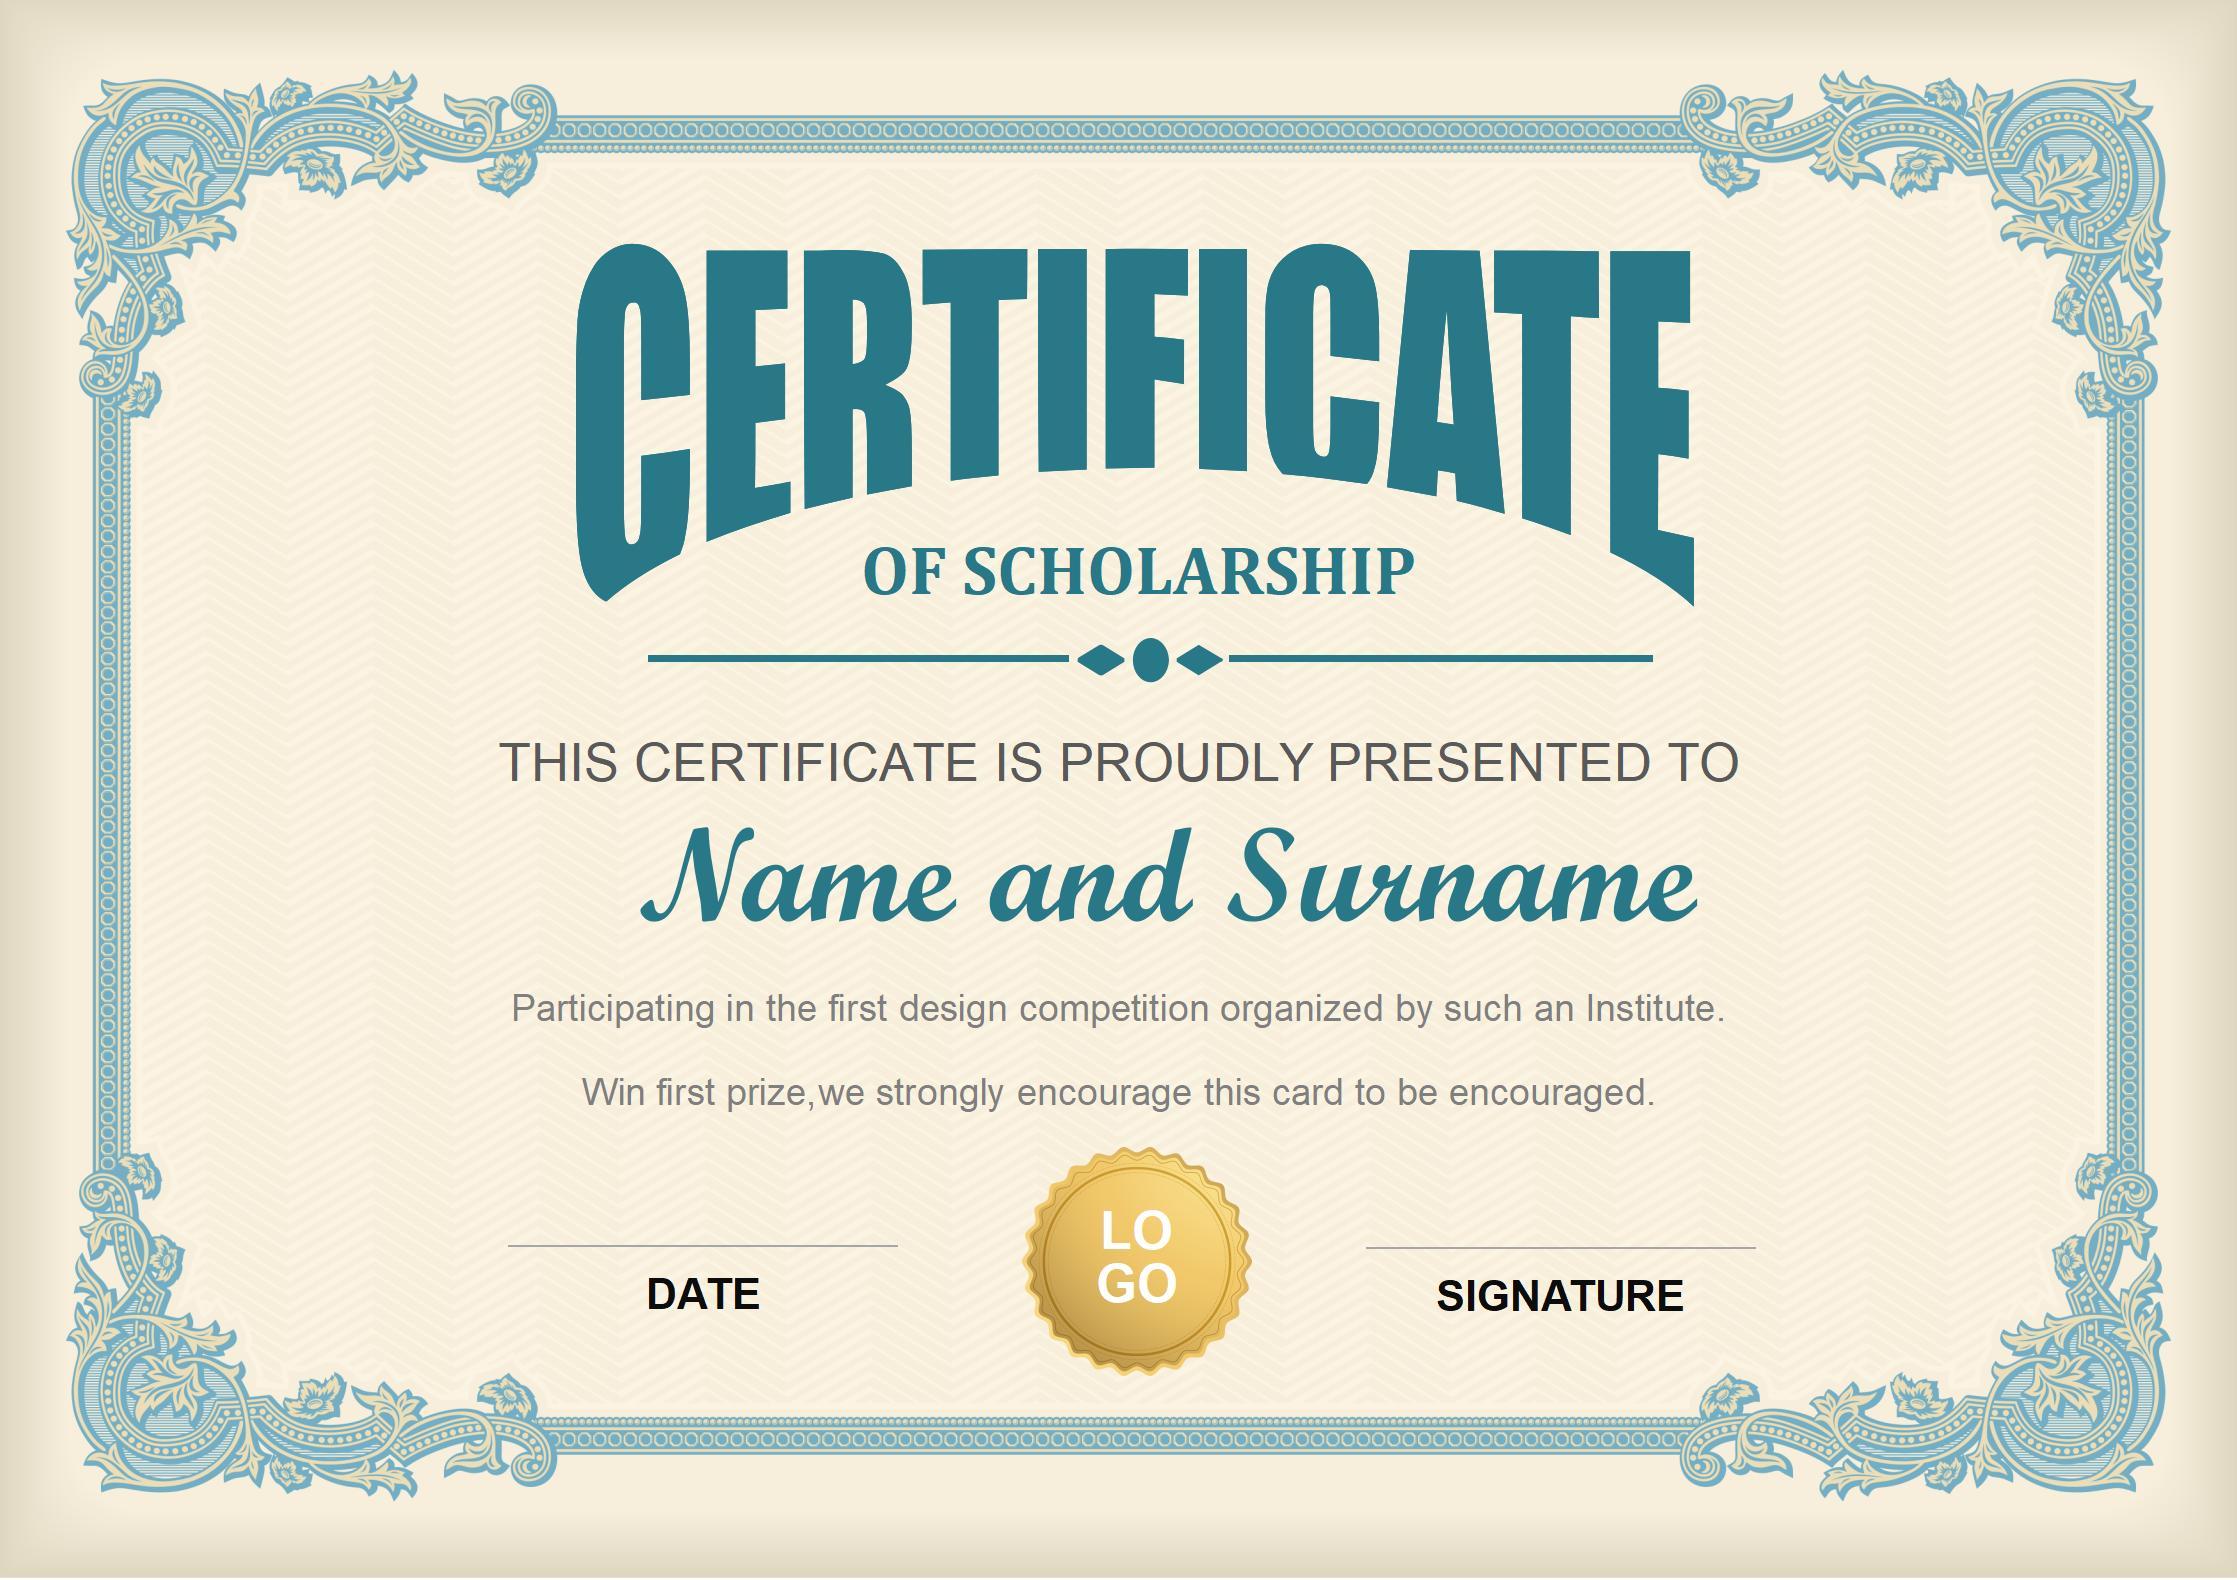 certificate of scholarship template, scholarship award certificate template, scholarship winner certificate template, memorial scholarship certificate template, church scholarship certificate templates, rotary scholarship certificate template, college scholarship certificate template, scholarship certificate template editable